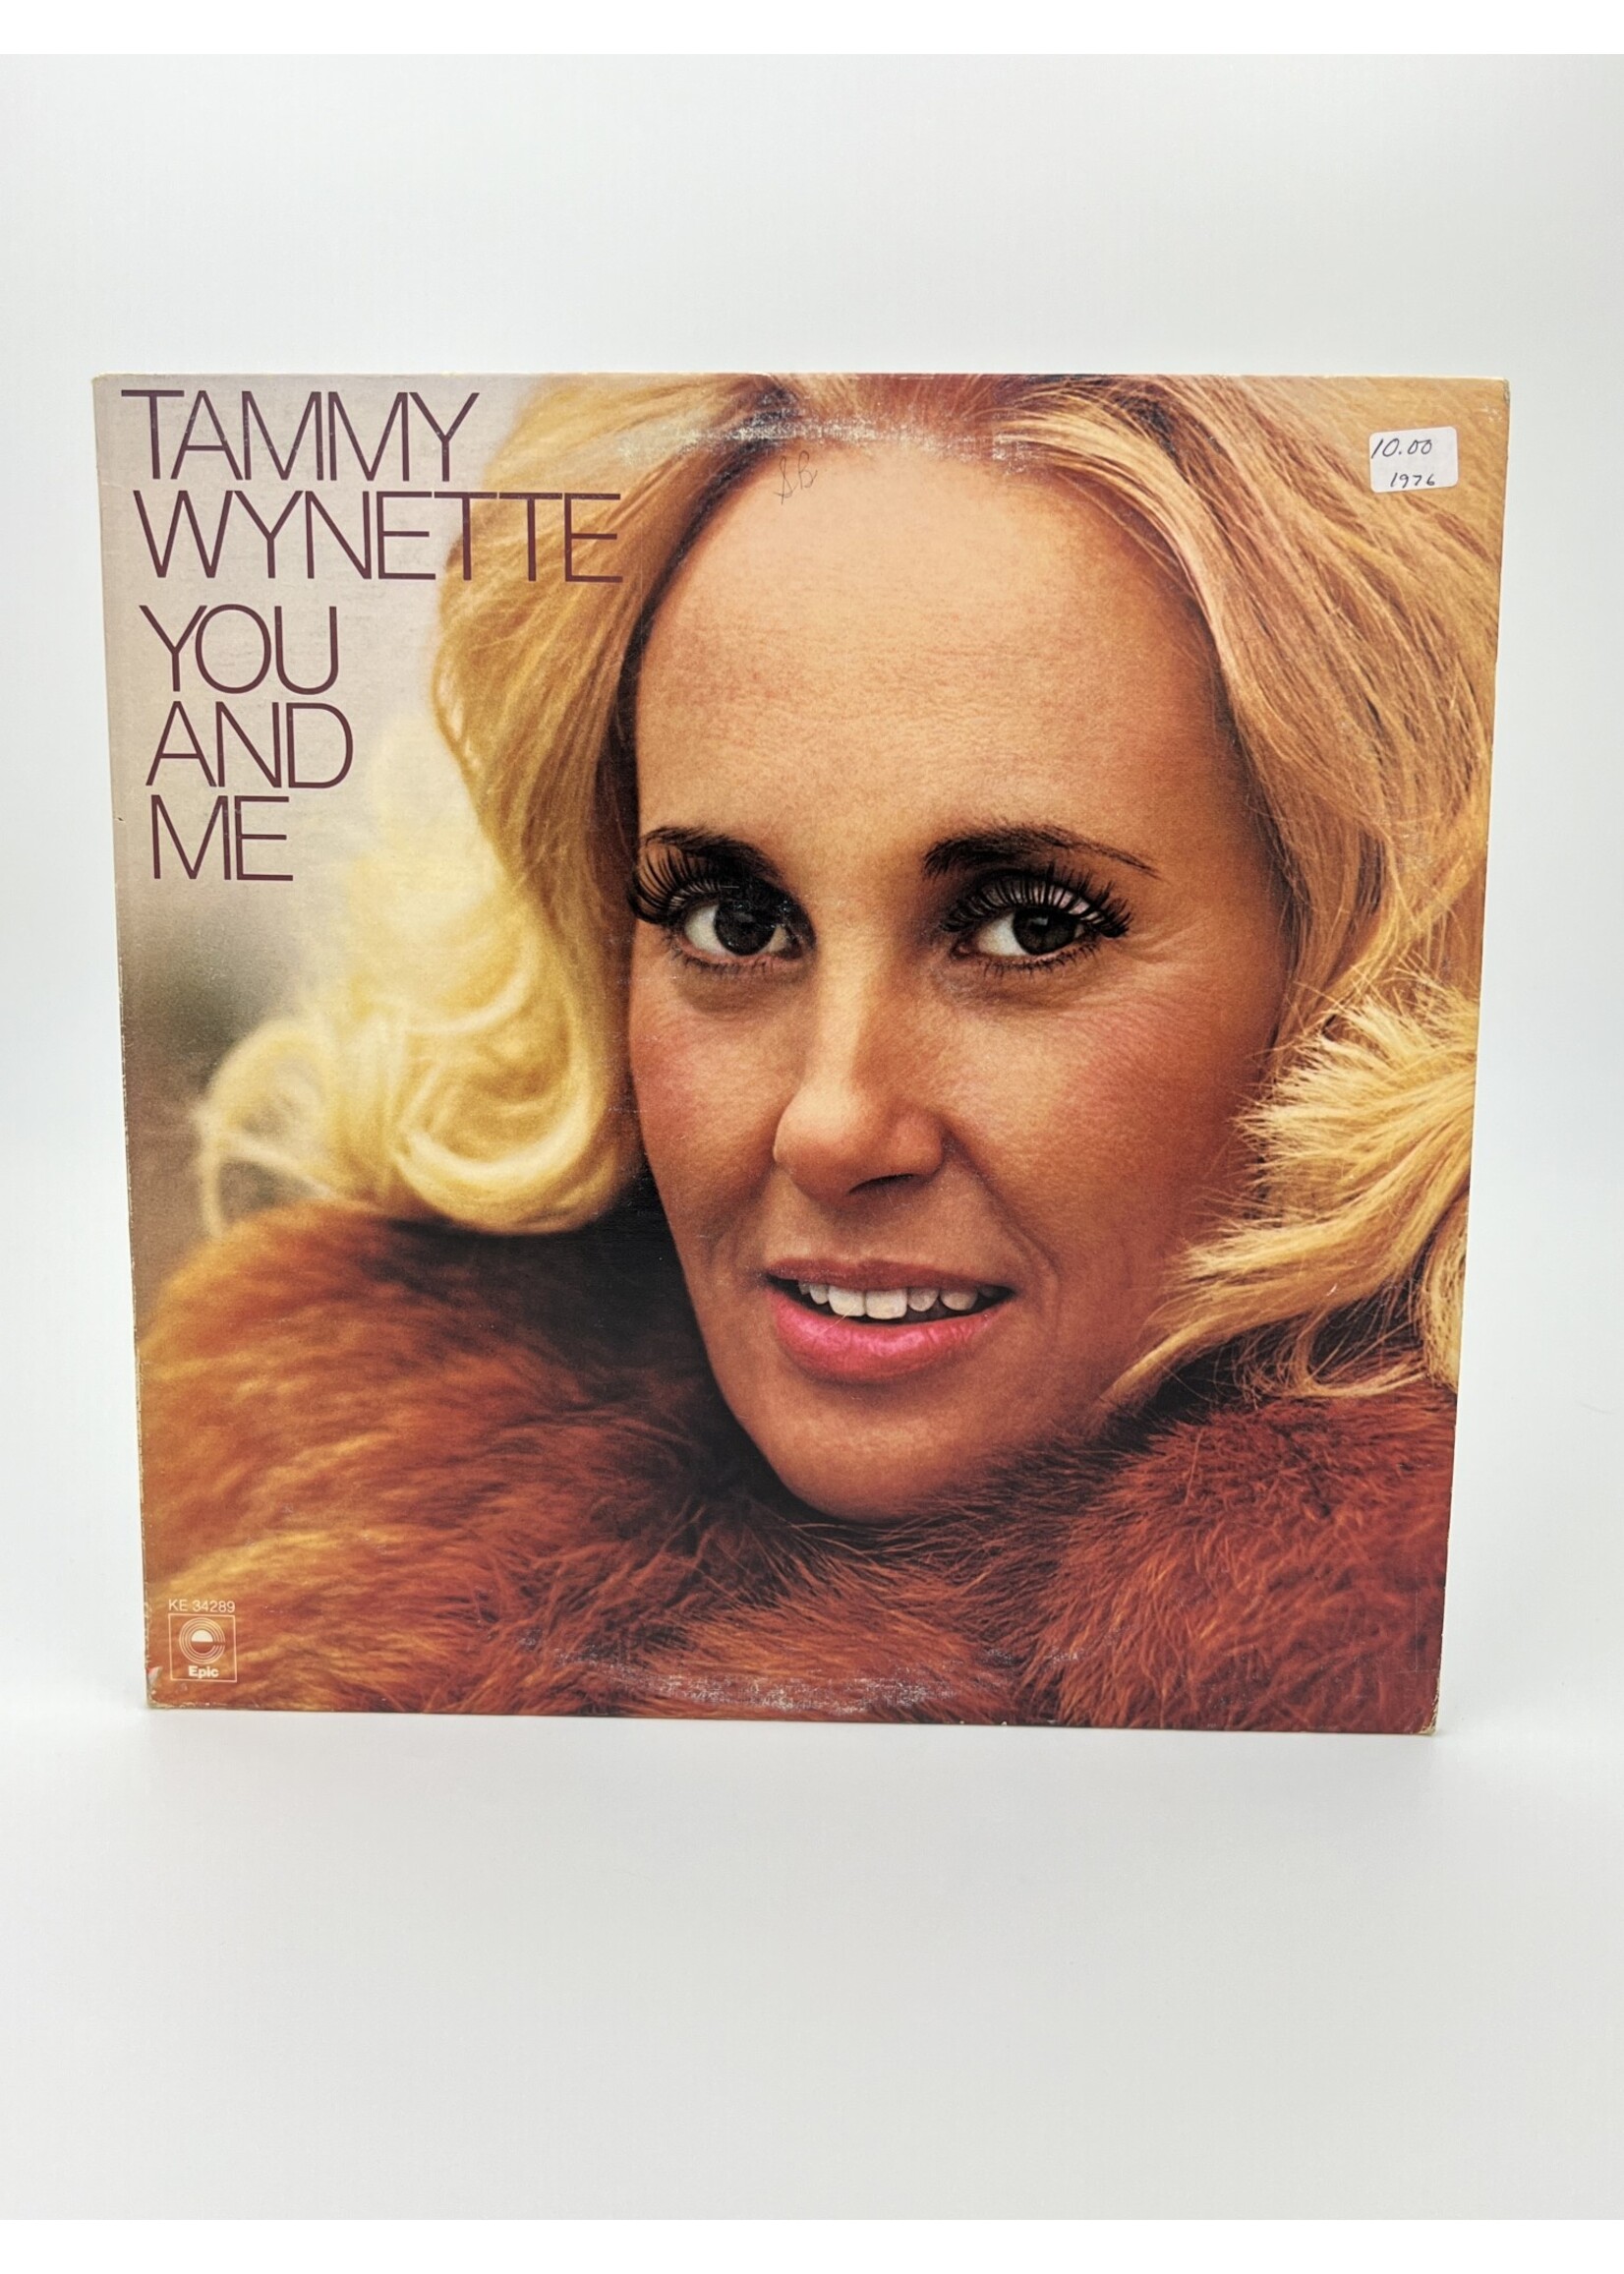 LP   Tammy Wynette You And Me LP Record